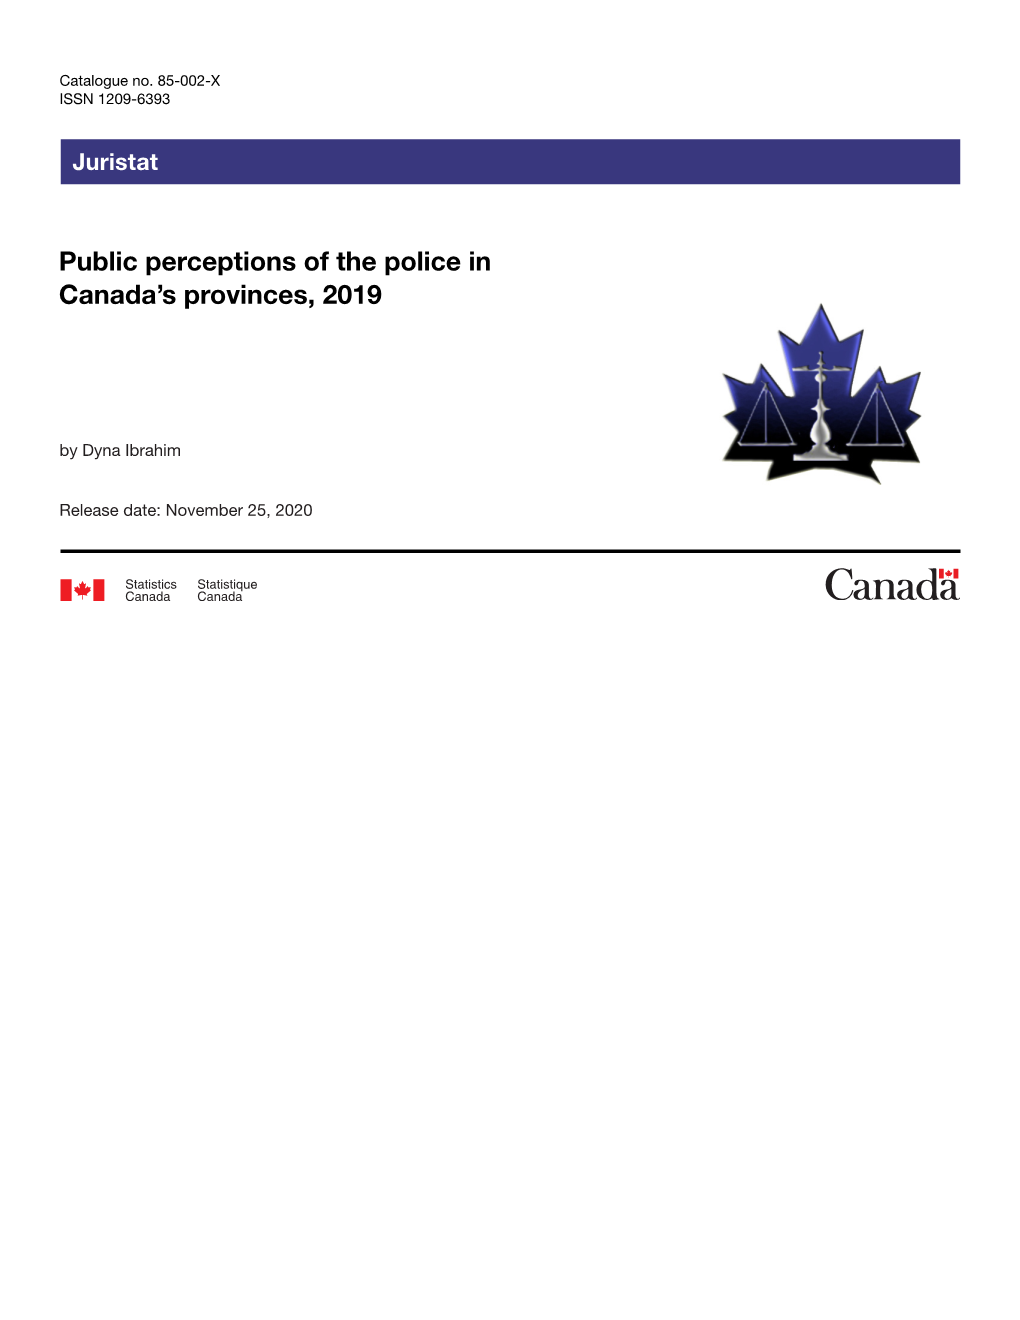 Public Perceptions of the Police in Canada's Provinces, 2019